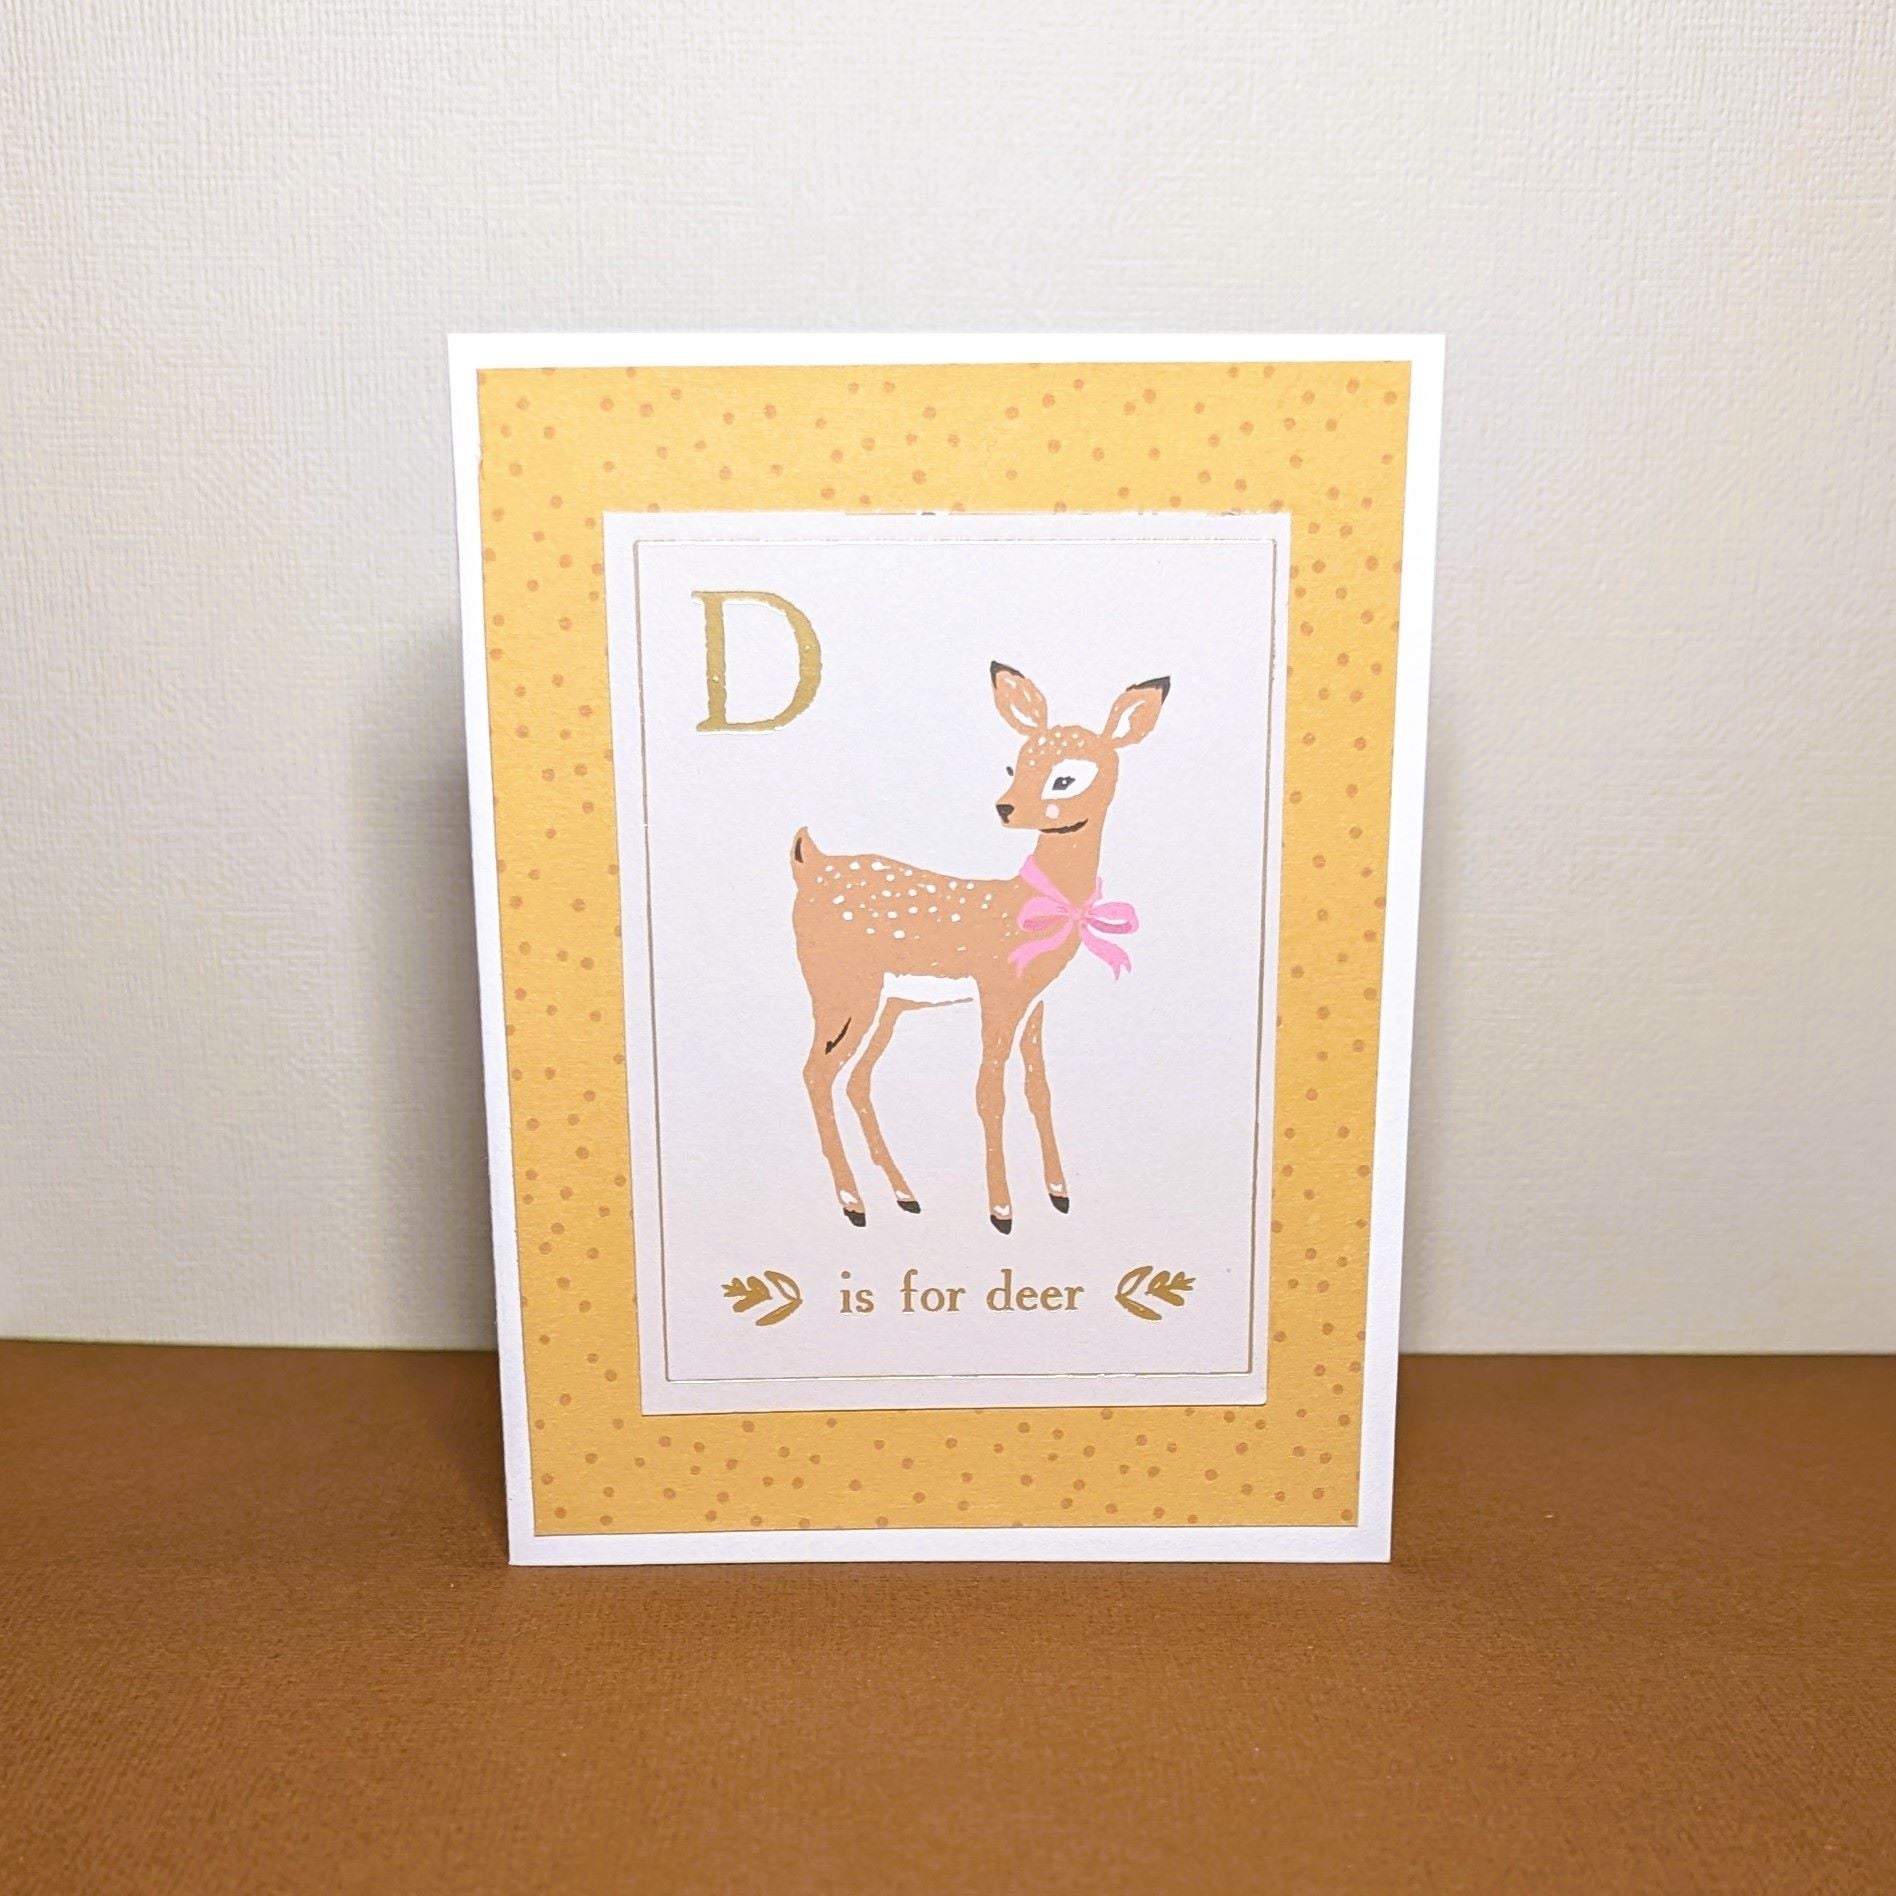 D is for Deer- Say Hello Collection - Handmade Greeting Card - 31 Rubies Designs